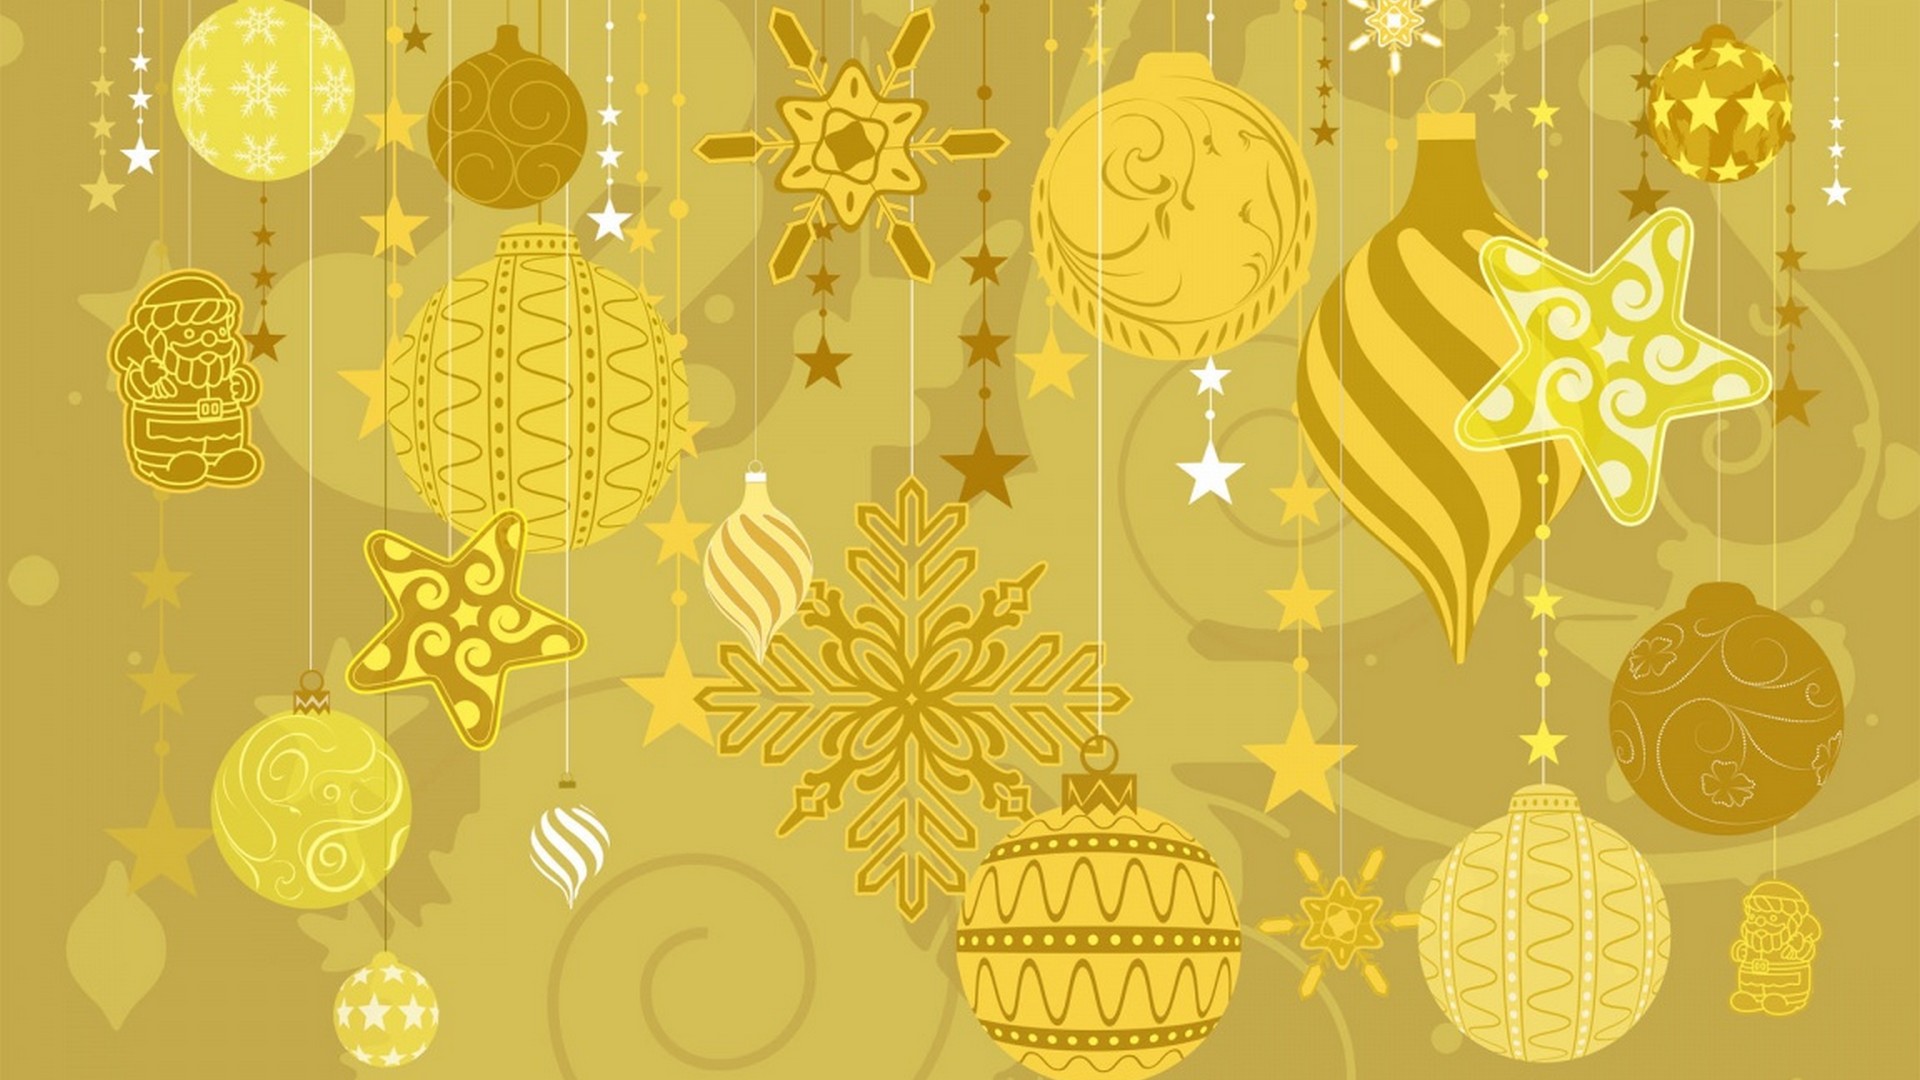 Gold Sparkle Desktop Backgrounds With Resolution 1920X1080